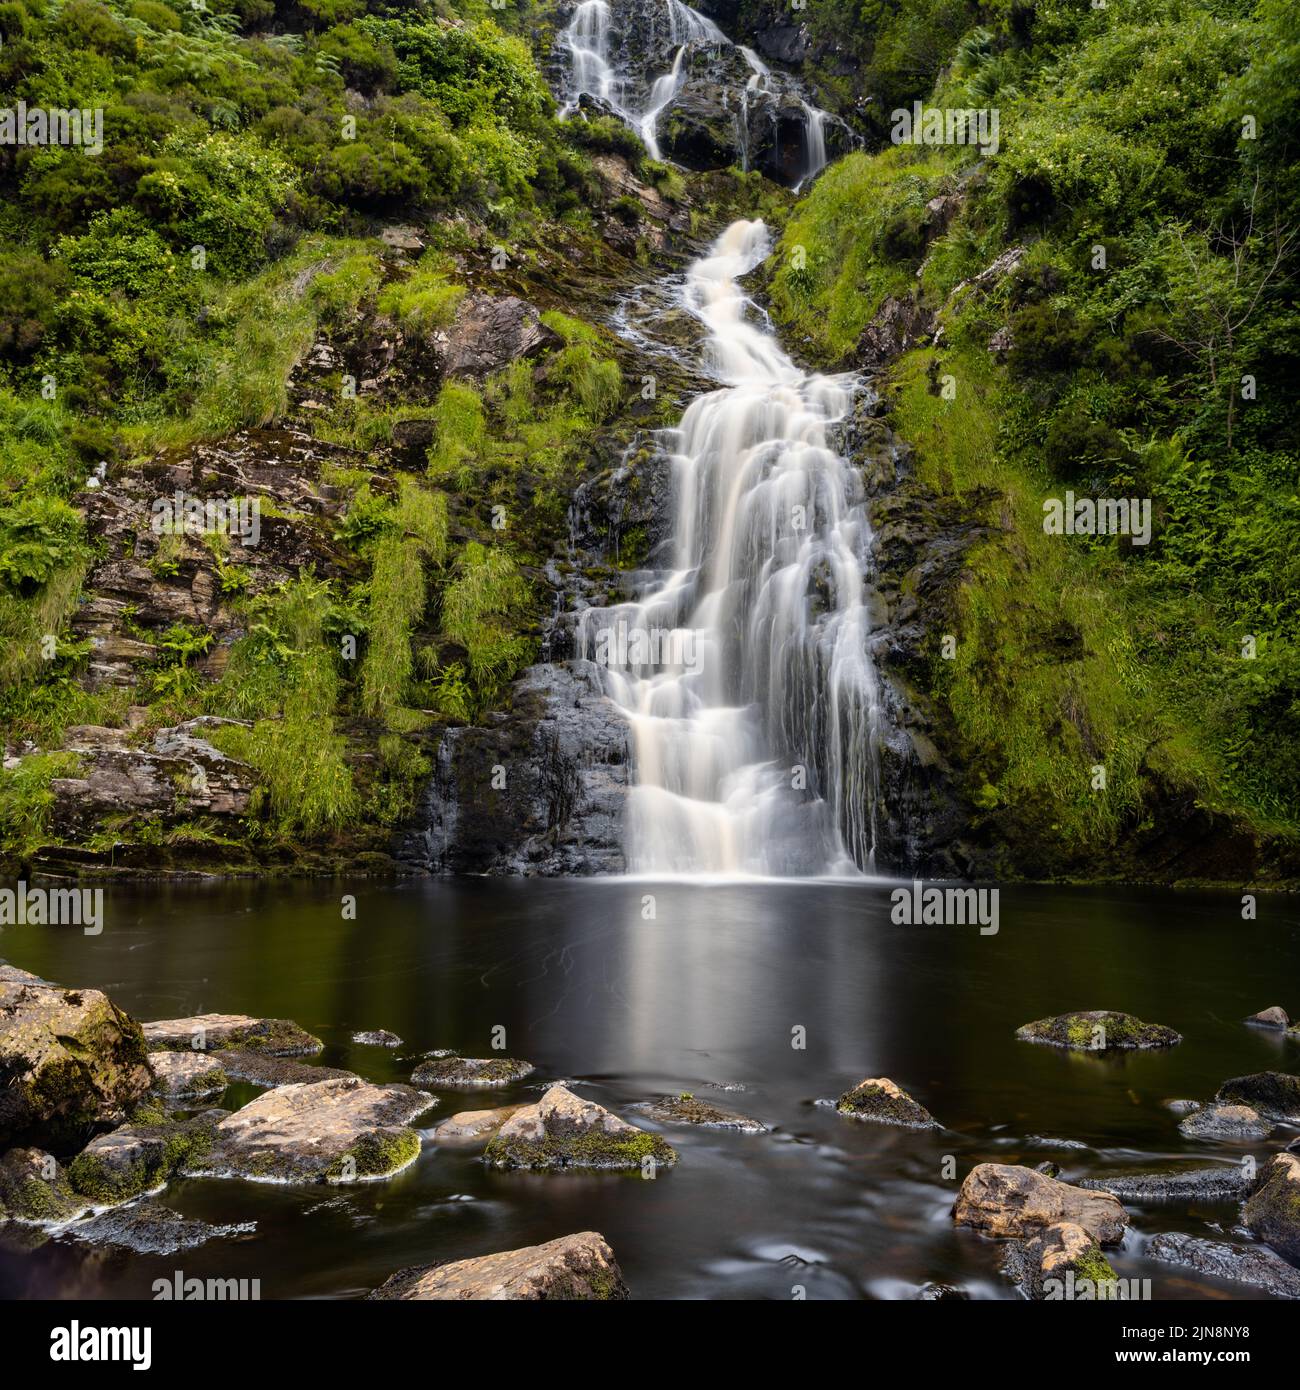 A view of the picturesque Assaranca Waterfall on the coast of County Donegal in Ireland Stock Photo